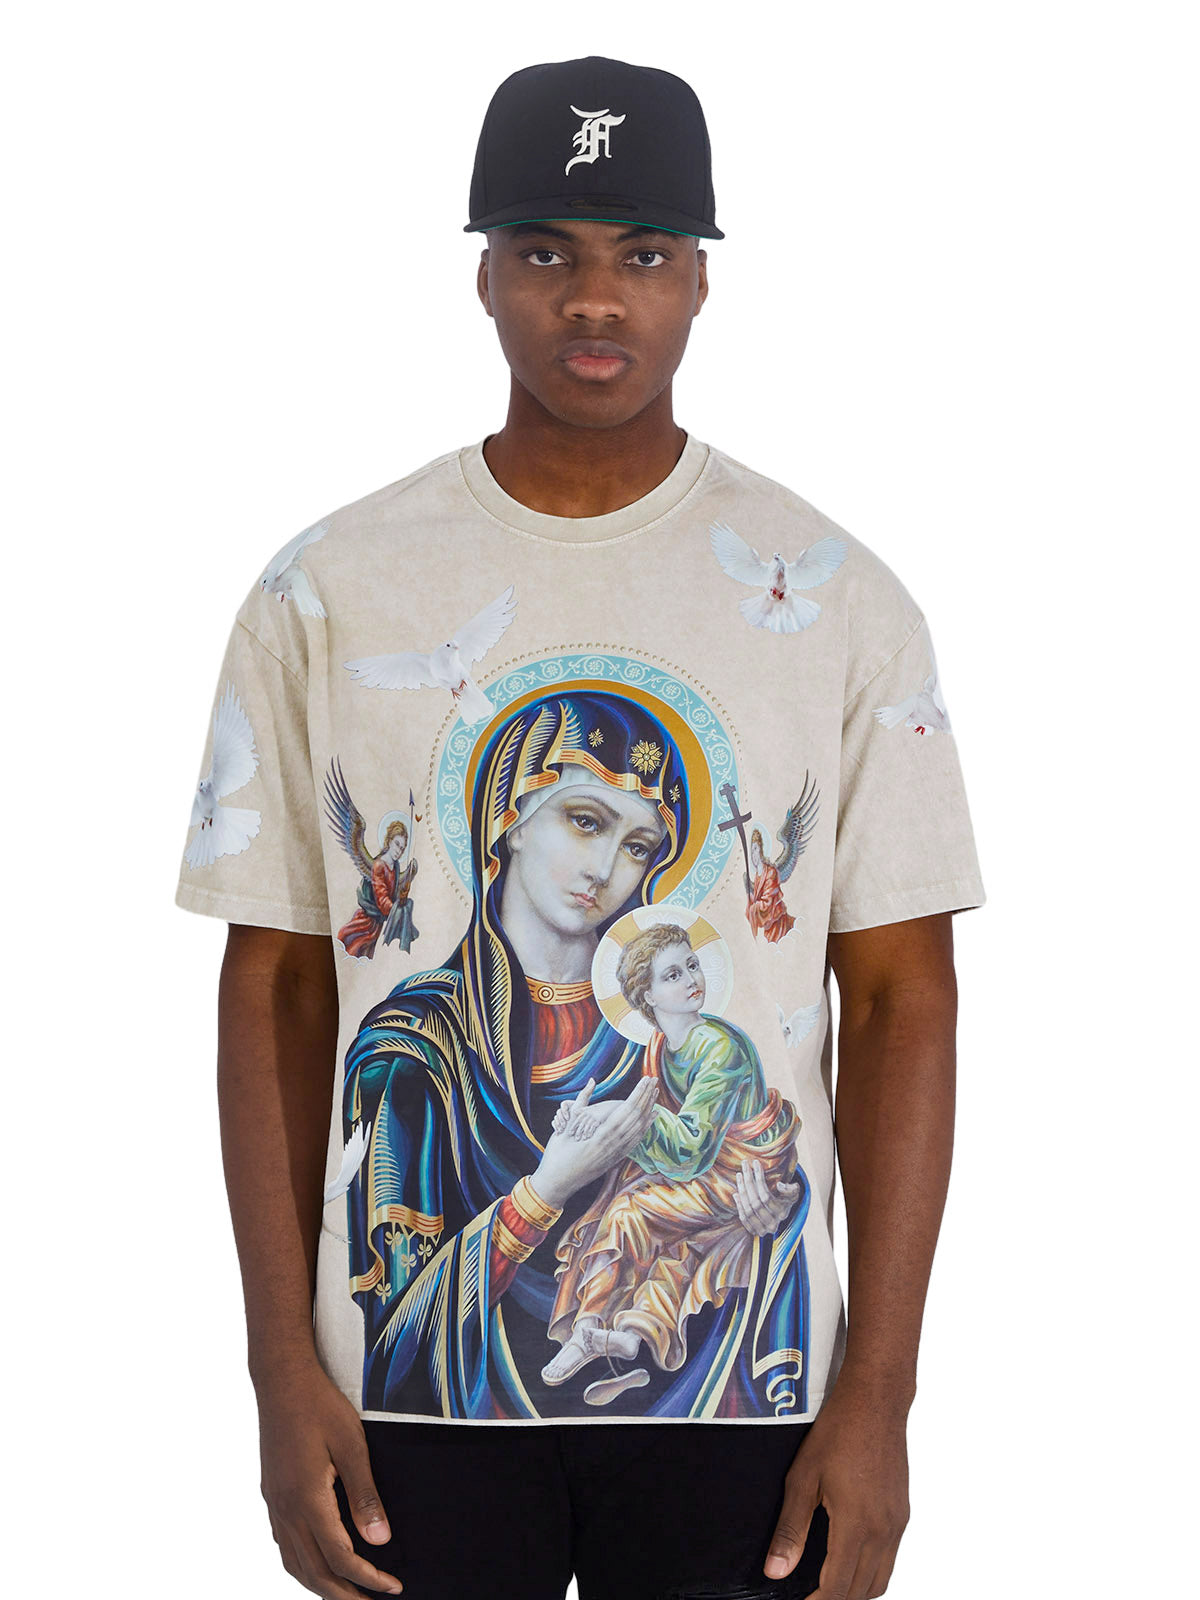 OBSTACLES & DANGERS© Madonna and Child Khaki T-shirt